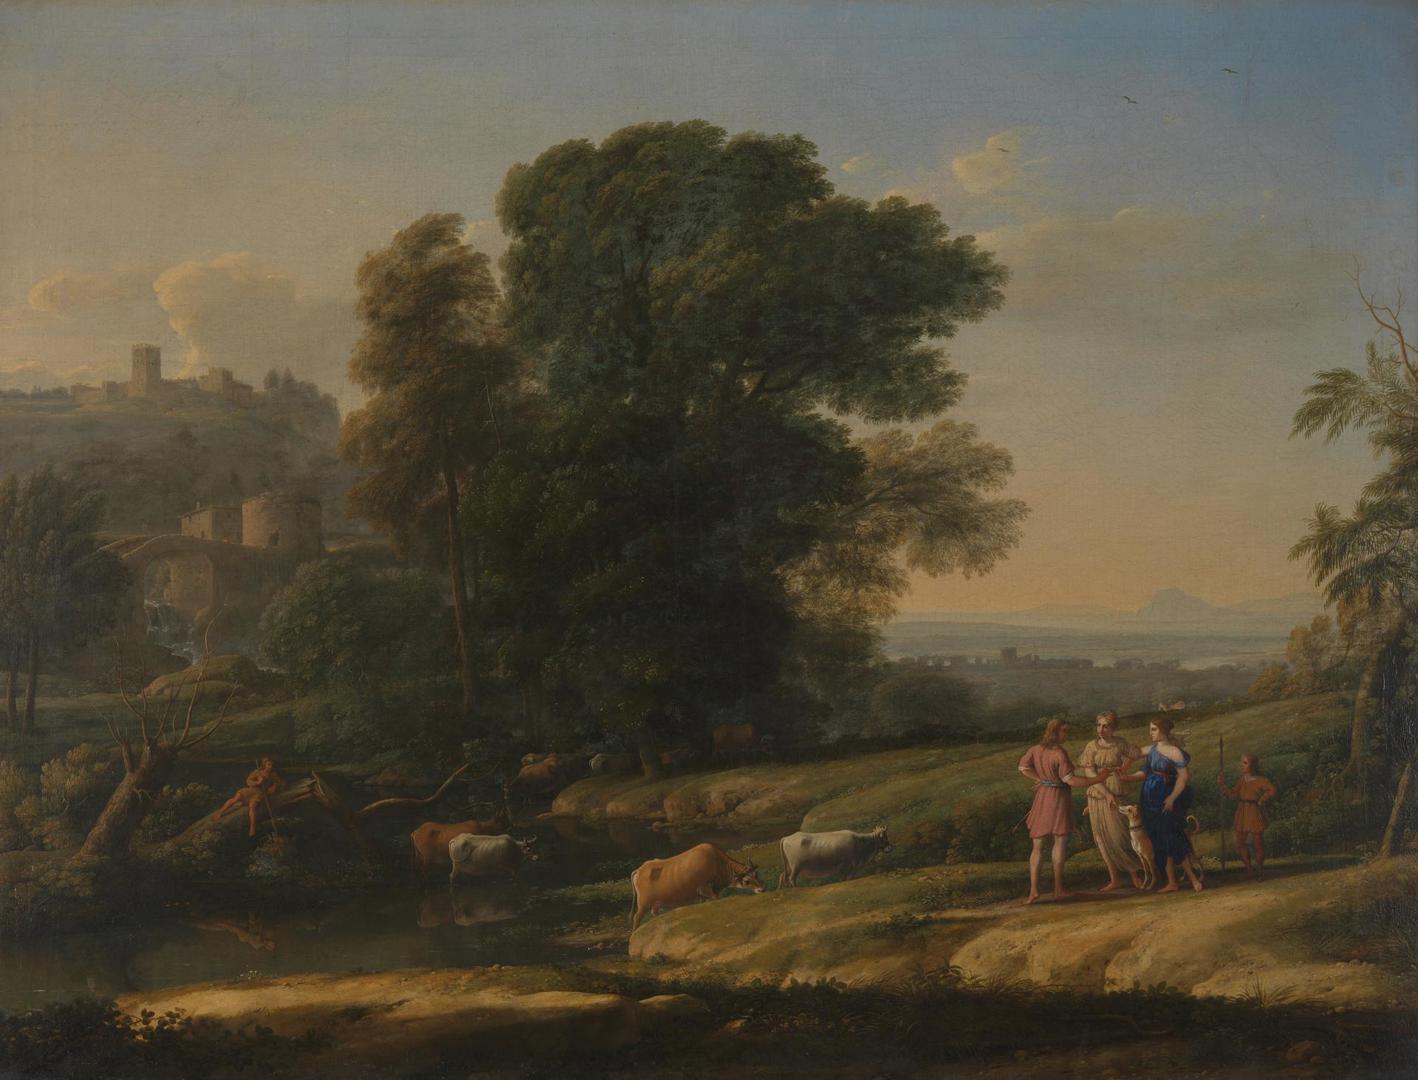 Landscape with Cephalus and Procris reunited by Diana by Claude